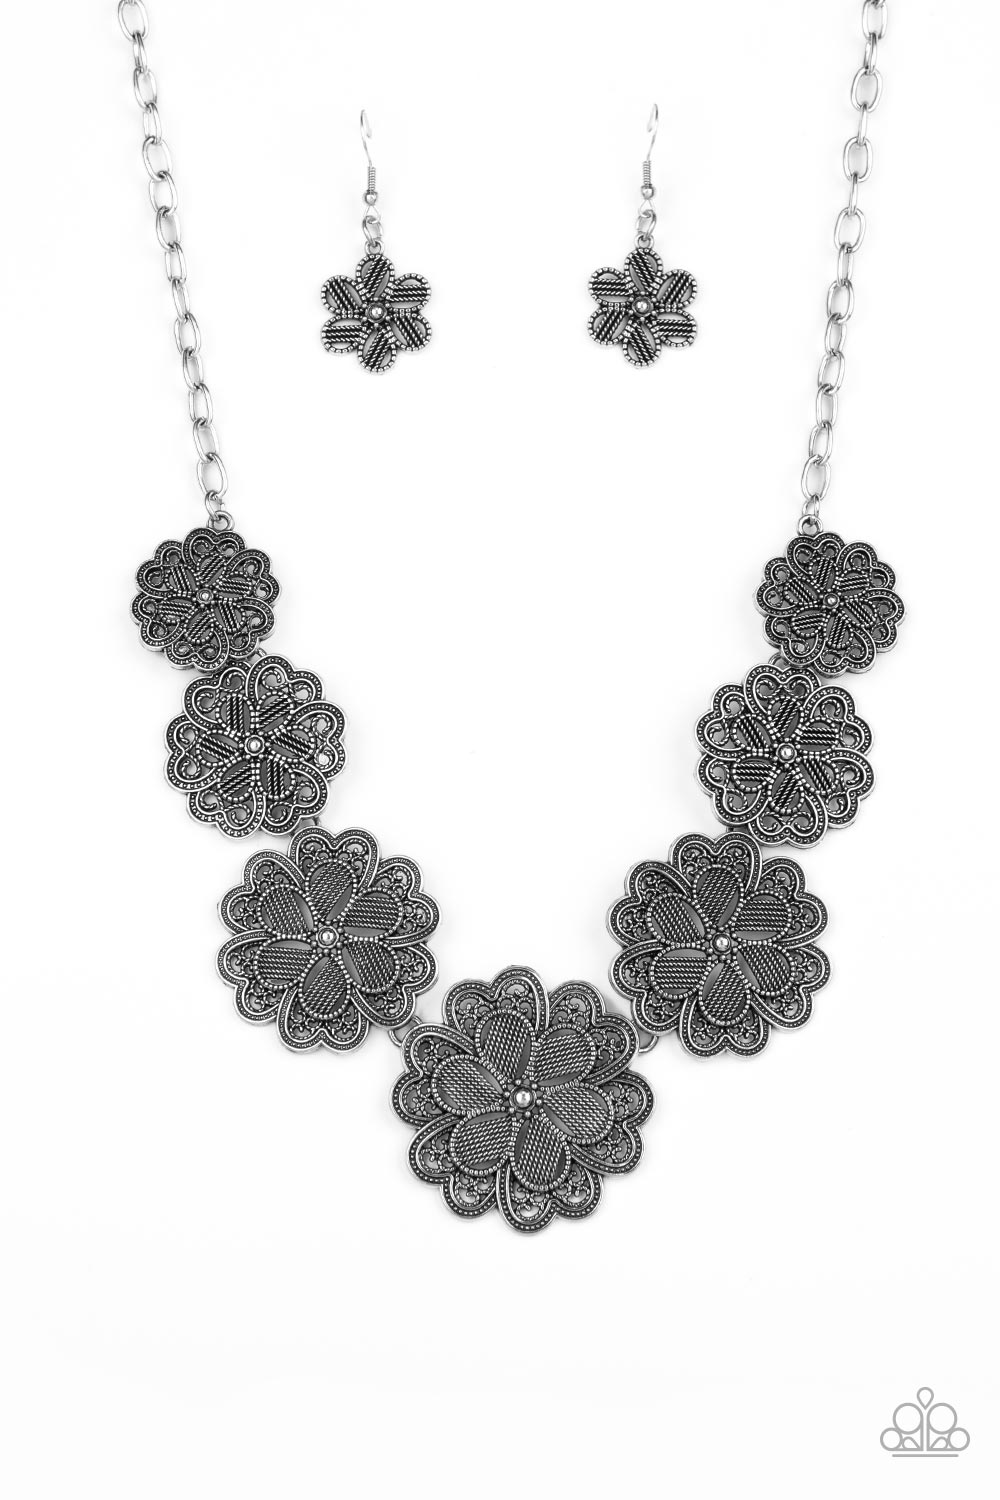 Basketful of Blossoms Silver Necklace - Paparazzi Accessories  Featuring metallic wicker-like patterns, stacks of teardrop and heart shaped filigree-filled silver petals delicately link into a decorative row of flowers. The floral frames gradually increase in size as they move towards the center, creating a vintage inspired display below the collar. Features an adjustable clasp closure.  Sold as one individual necklace. Includes one pair of matching earrings.